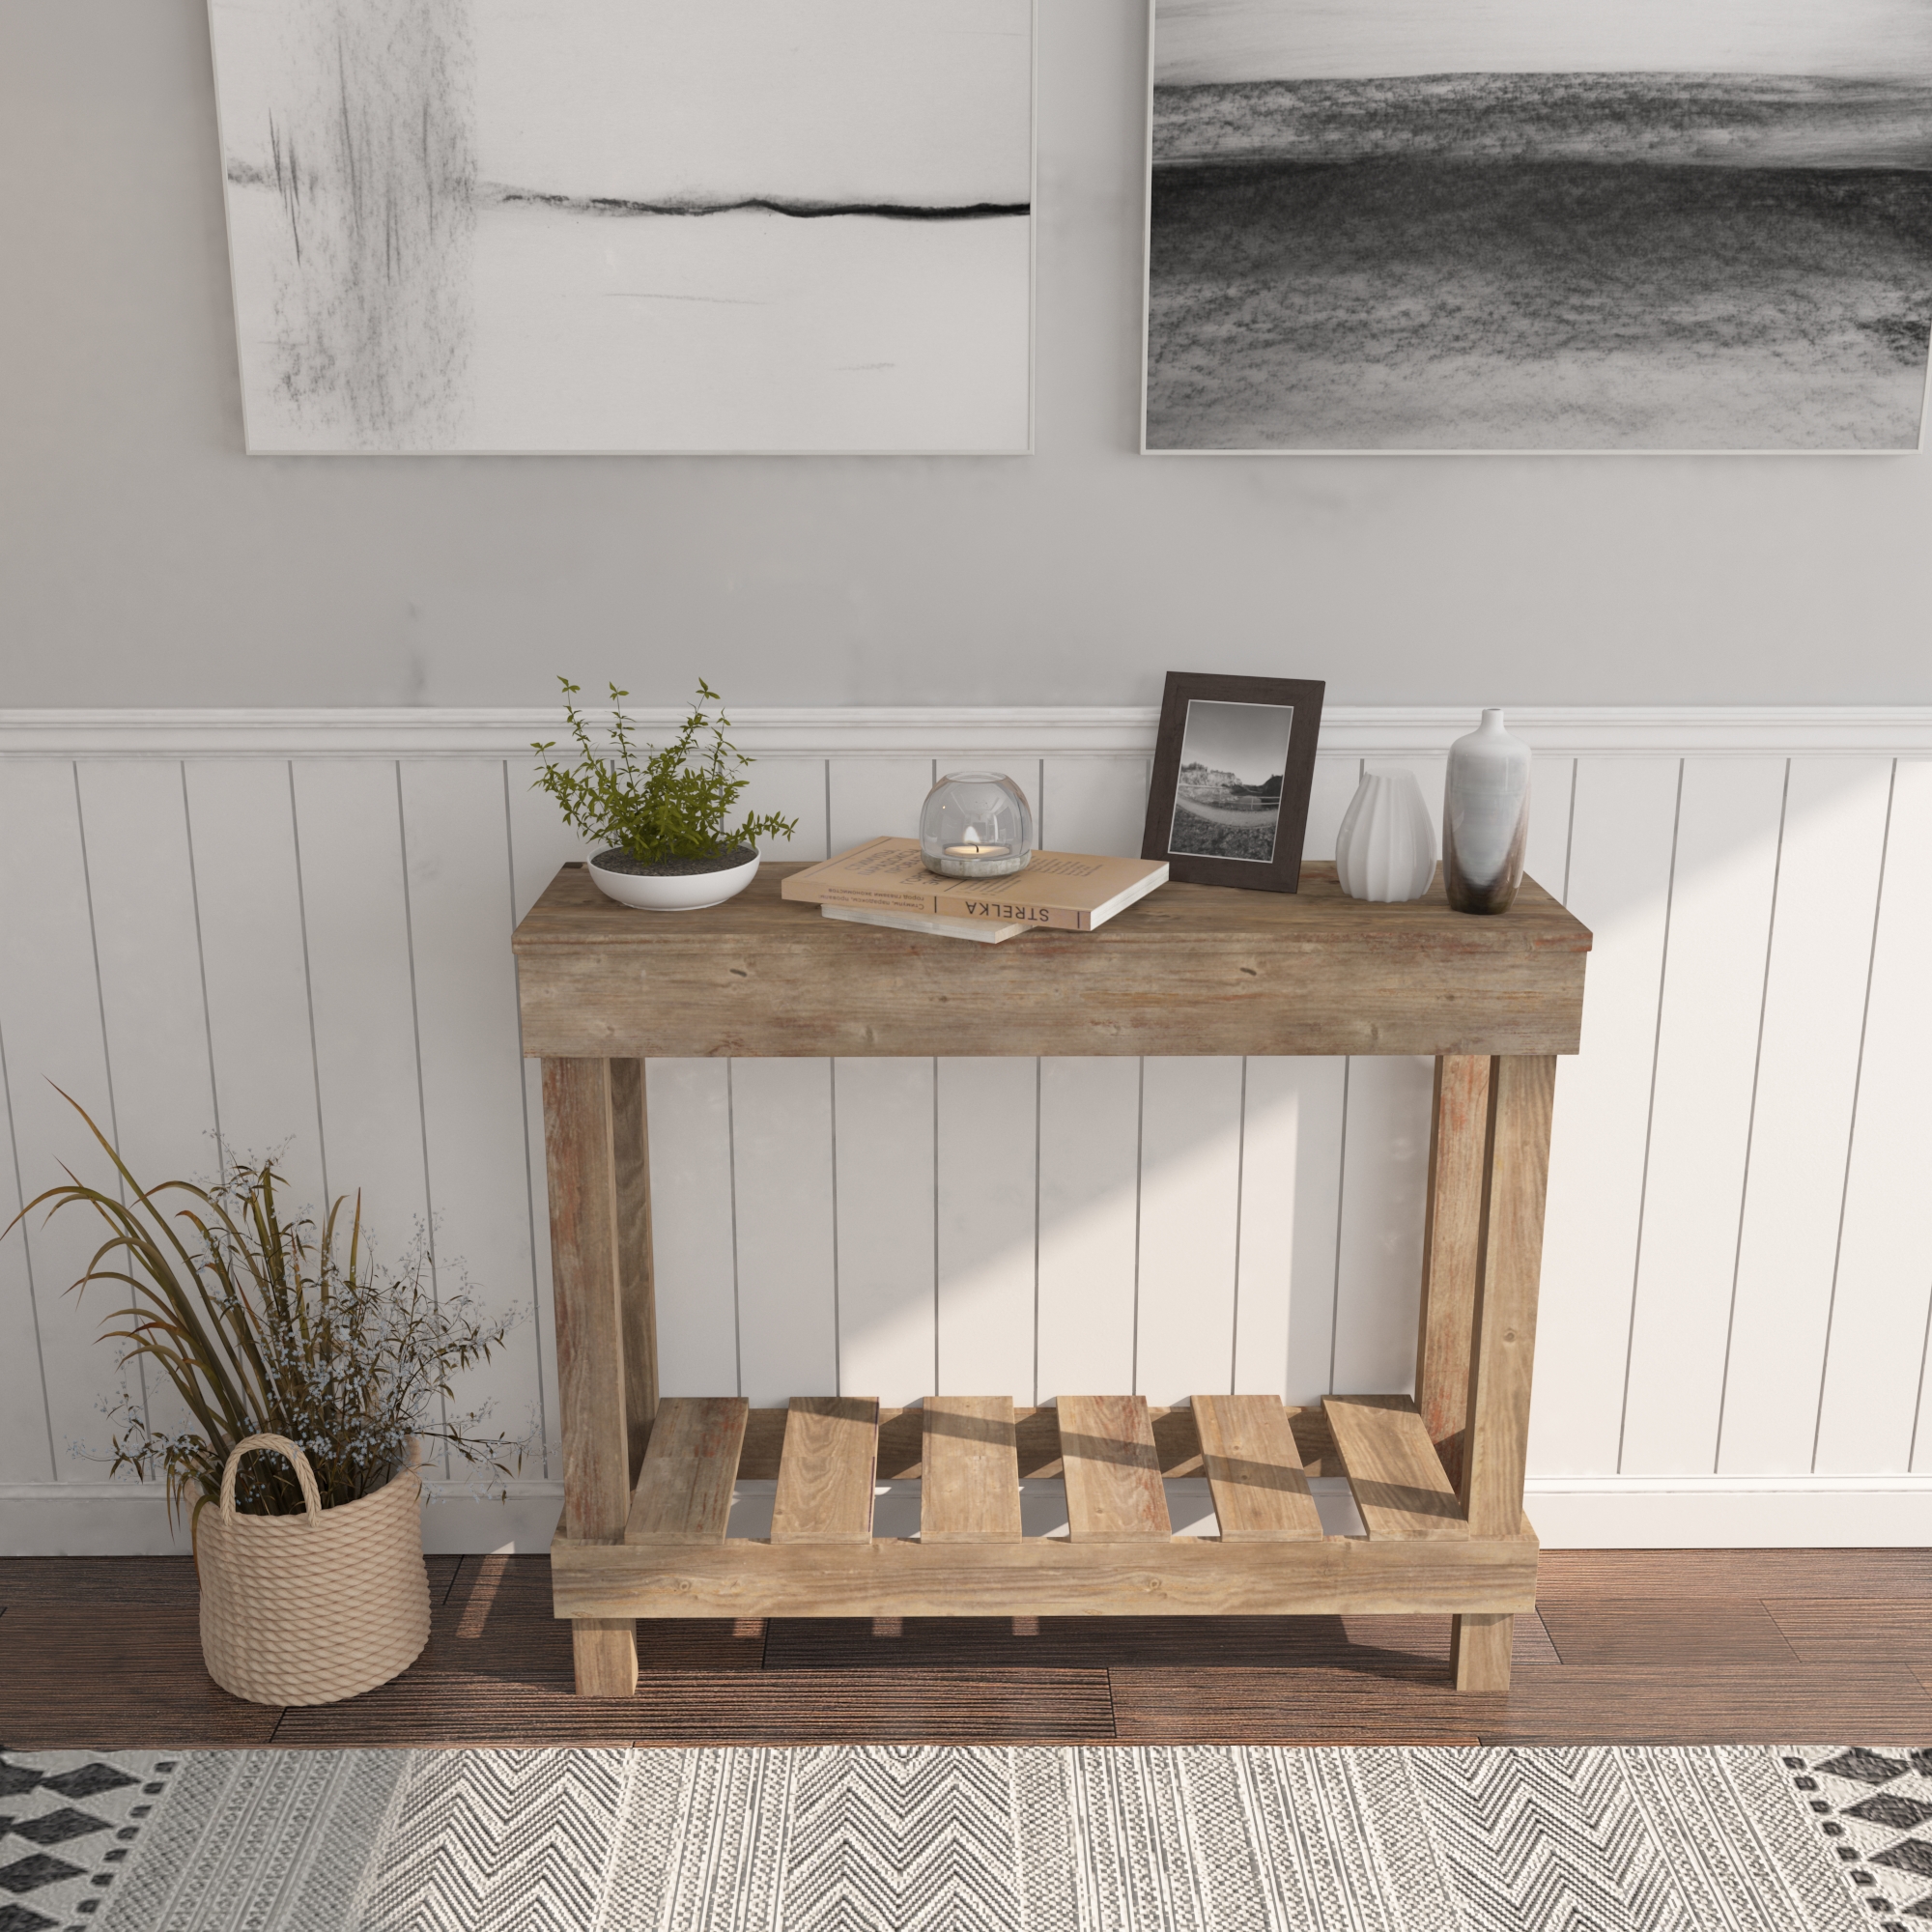 Woven Paths Farmhouse Rustic Wood Small Entryway or Living Room Sofa Table, Brown - image 2 of 4